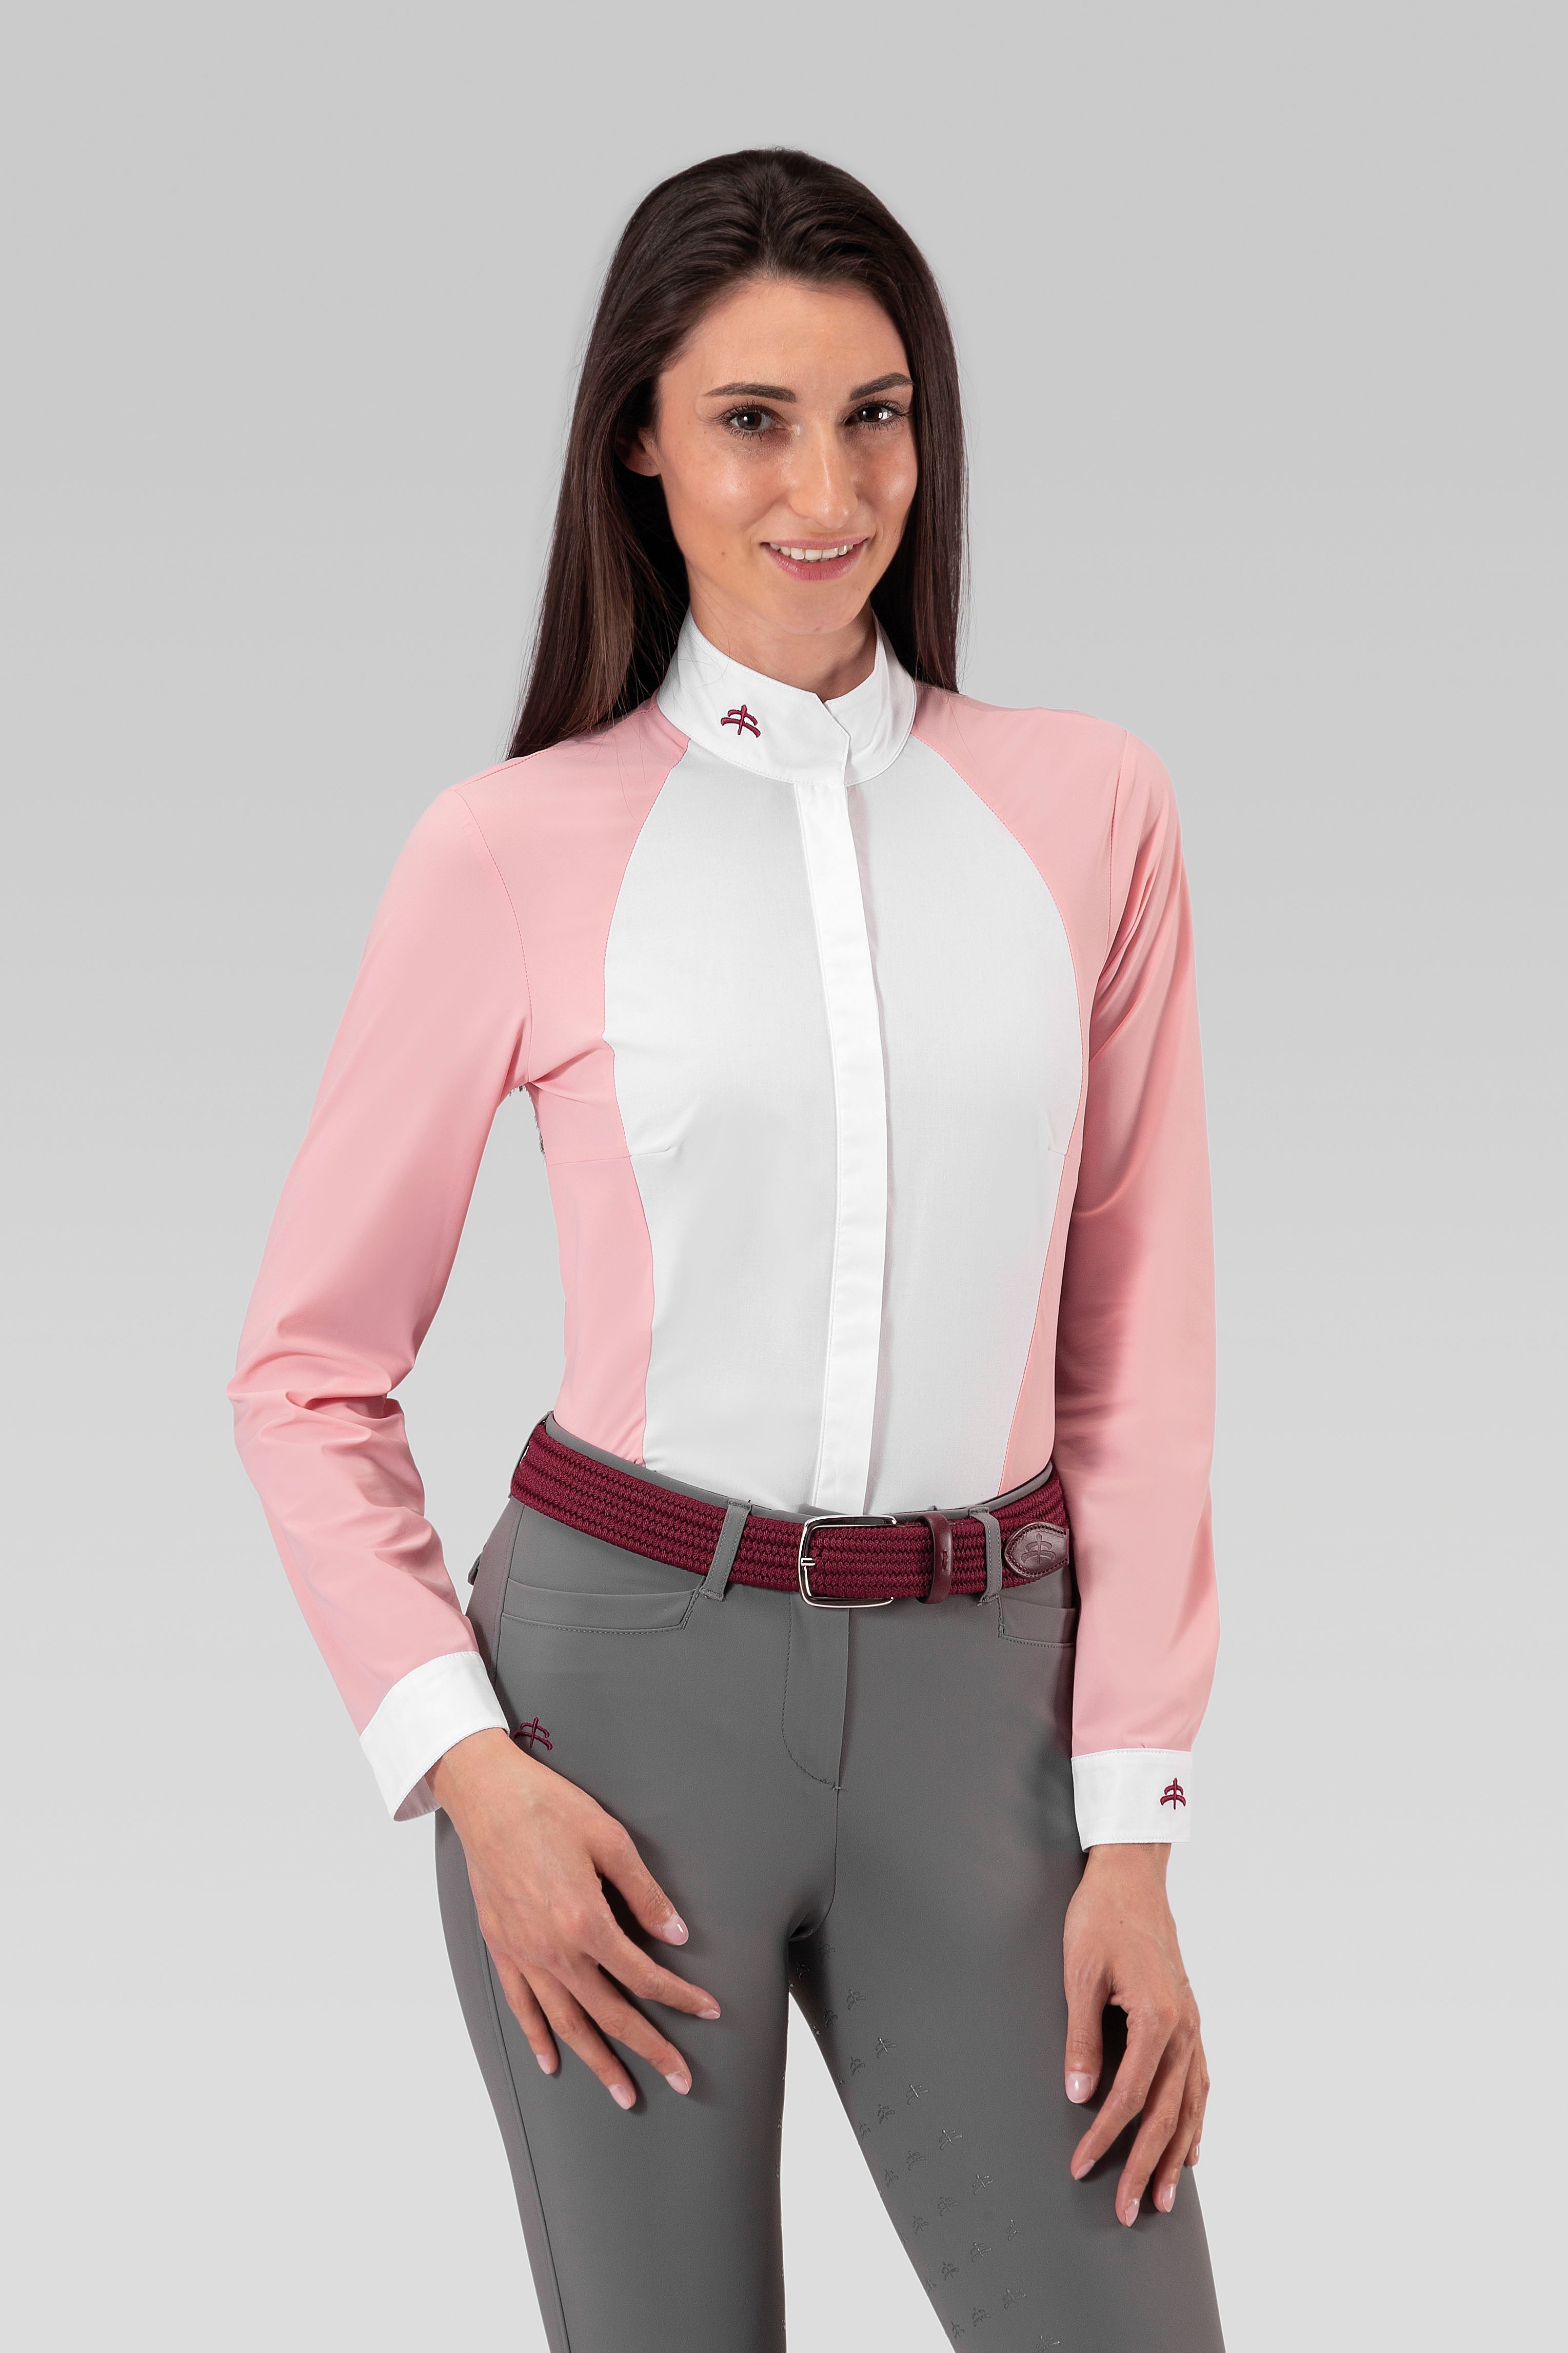 Makebe Italy Margot Technical Fabric Long Sleeve Show Shirt - Equiluxe Tack